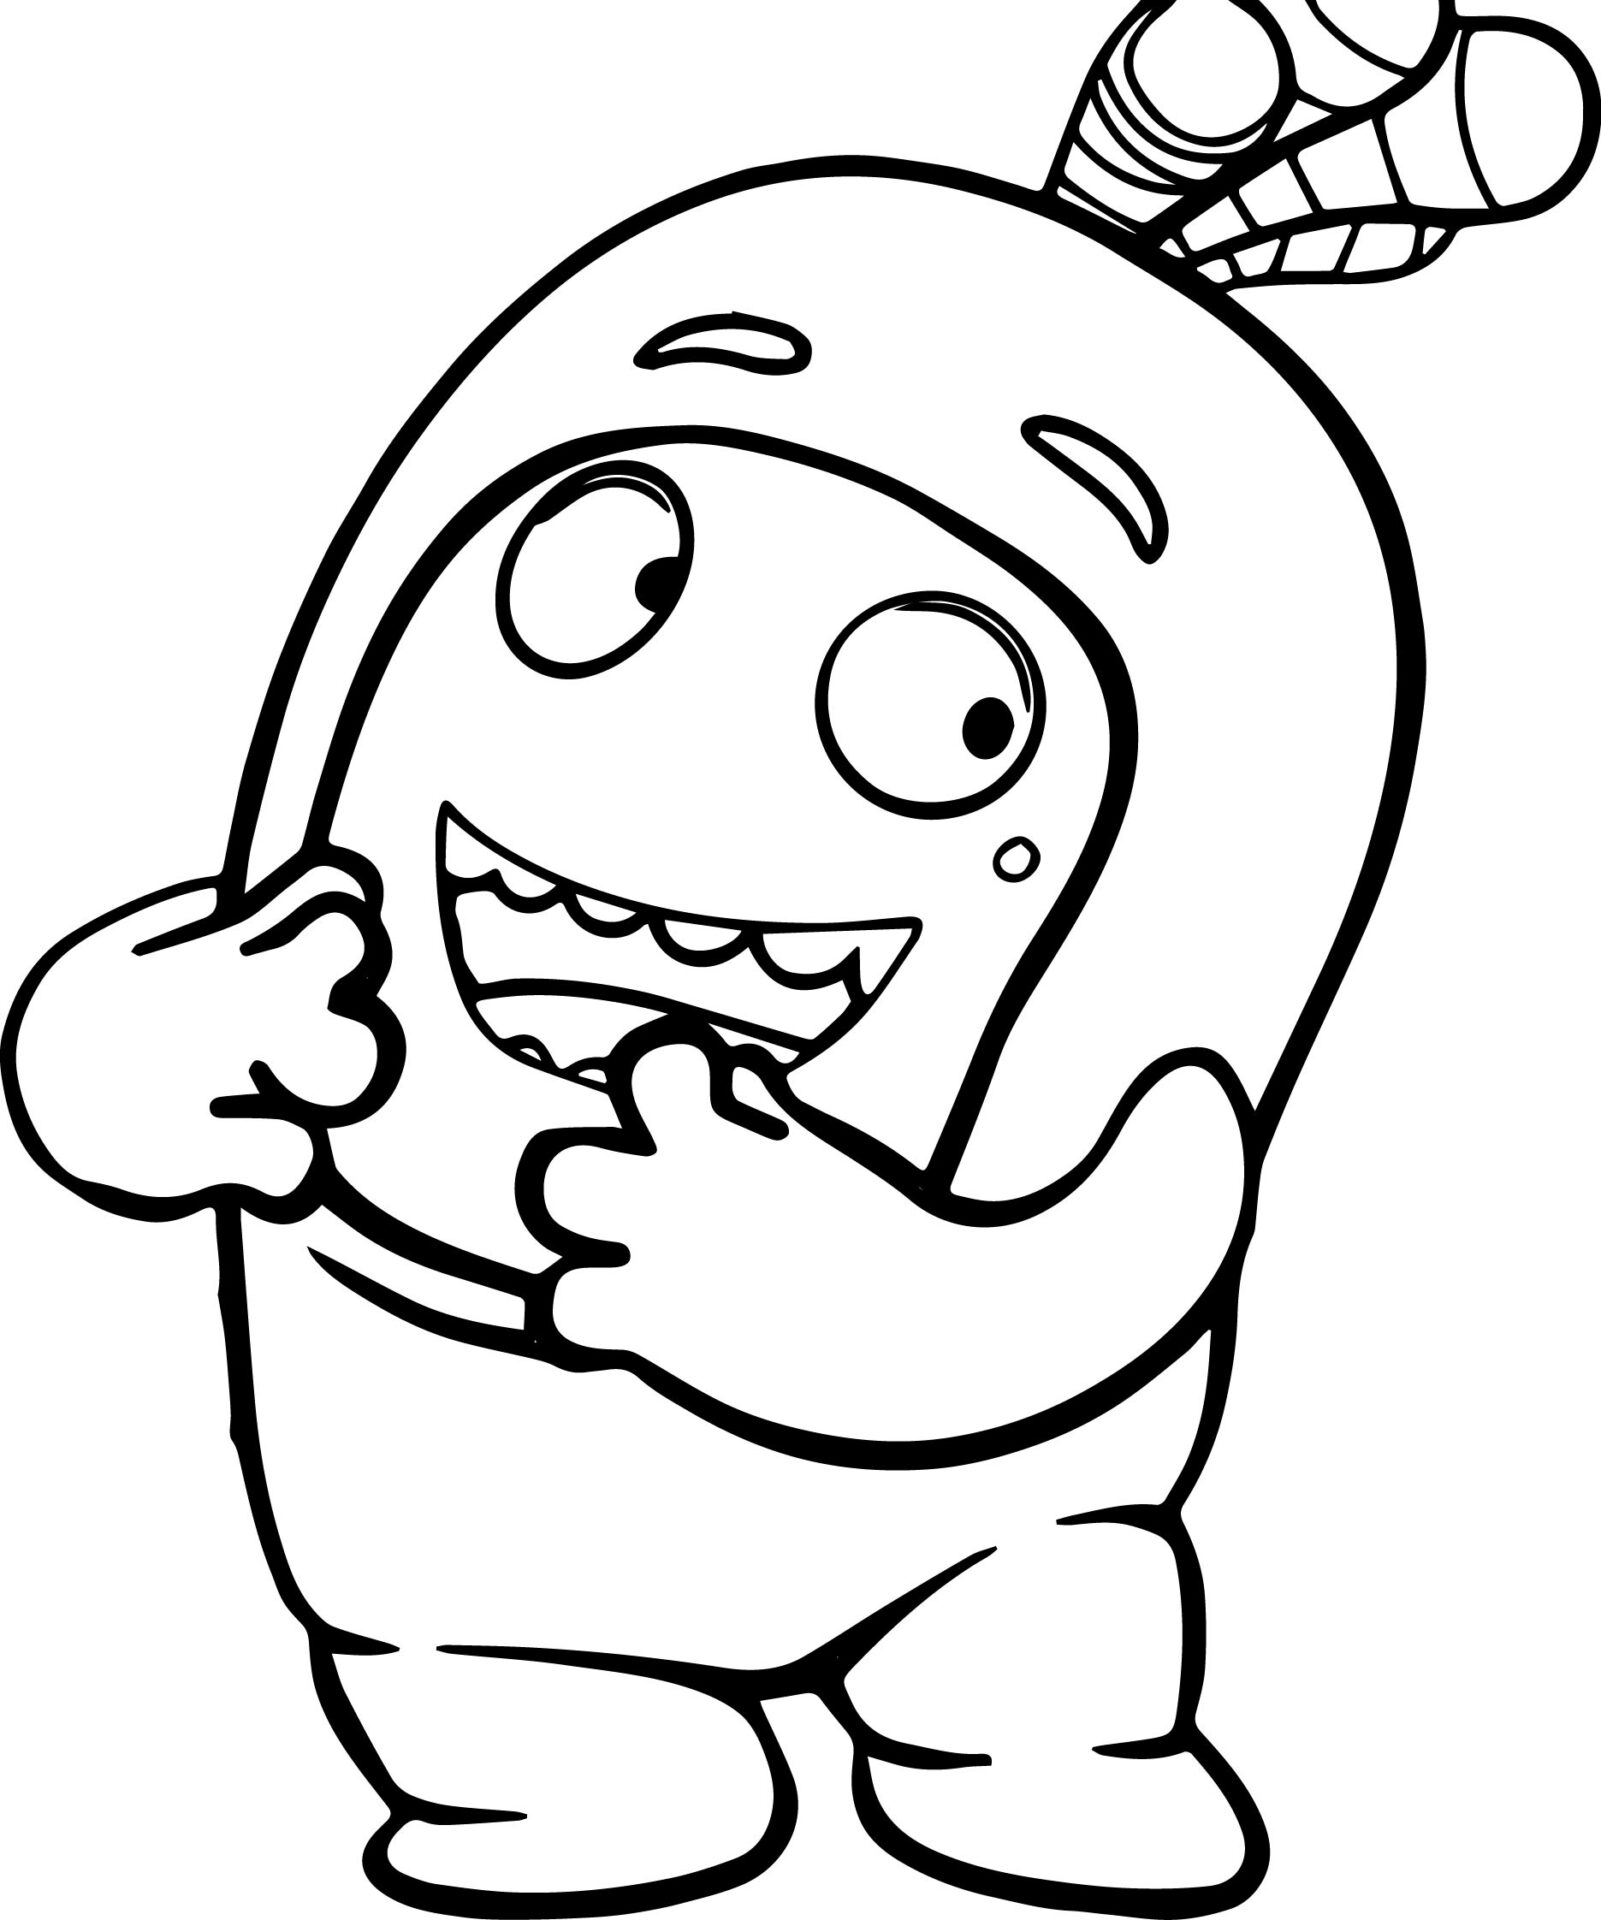 Oddbods Coloring Pages   Free Printable Coloring Pages for Kids